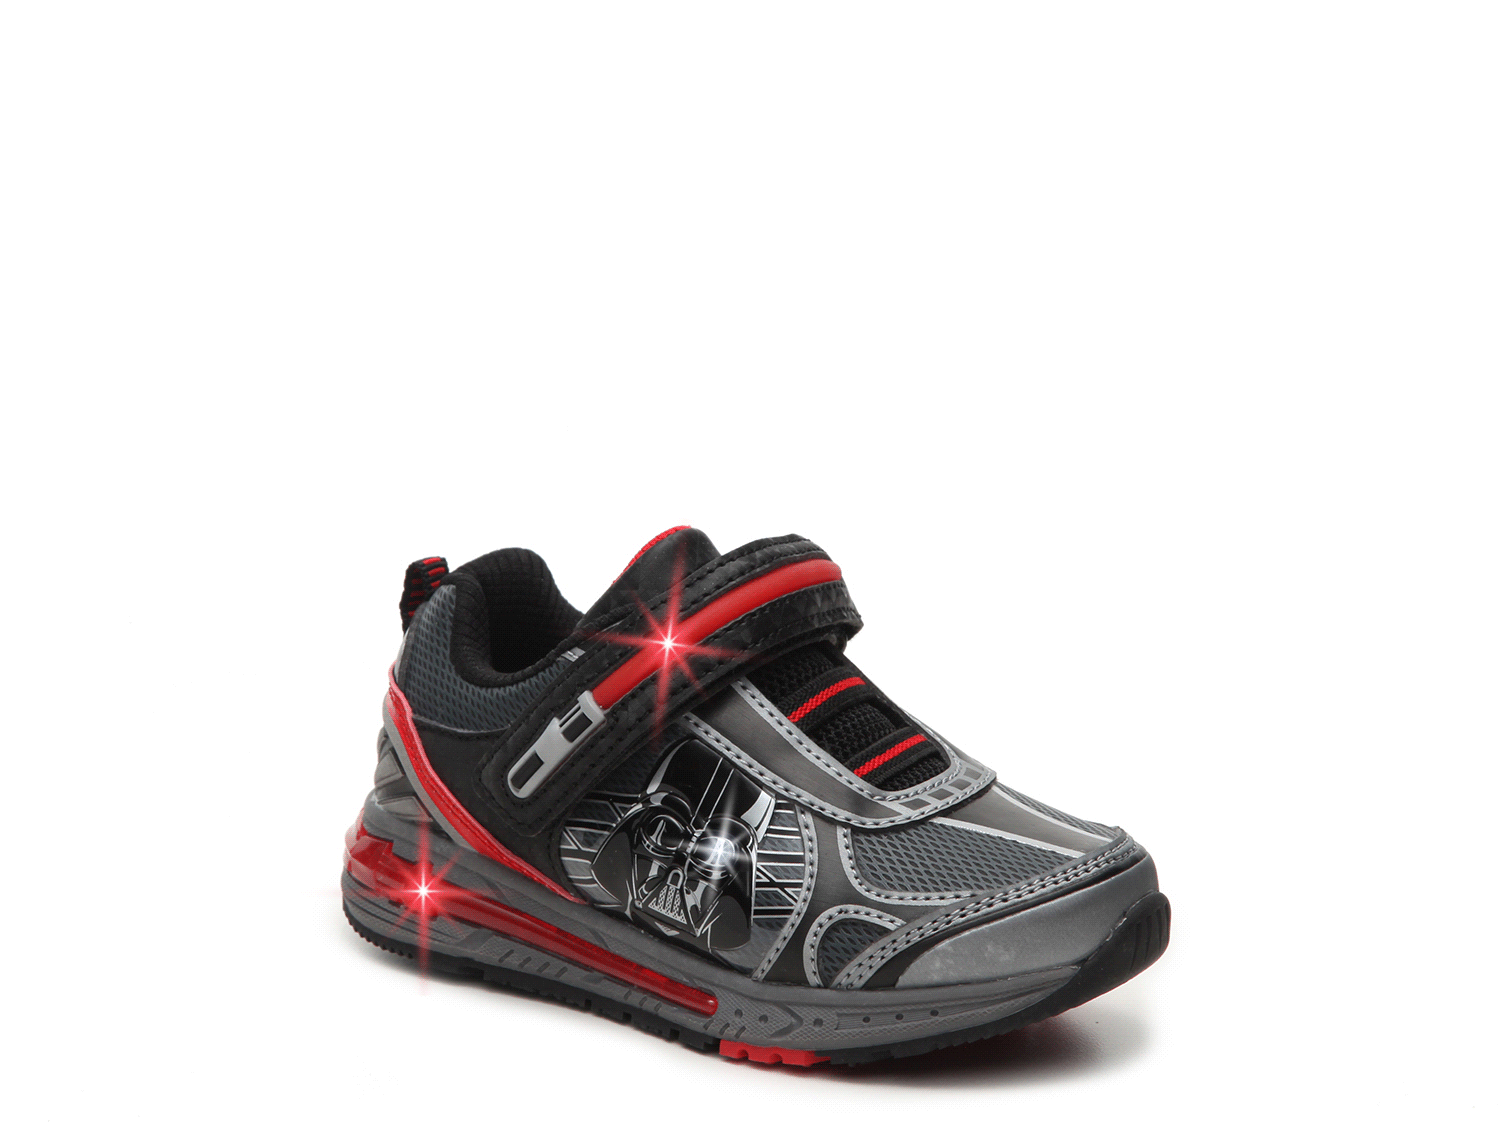 DISNEY STAR WARS TODDLERS LIGHT UP NON MARKING ATHLETIC SHOES FREE SHIP NWOB 